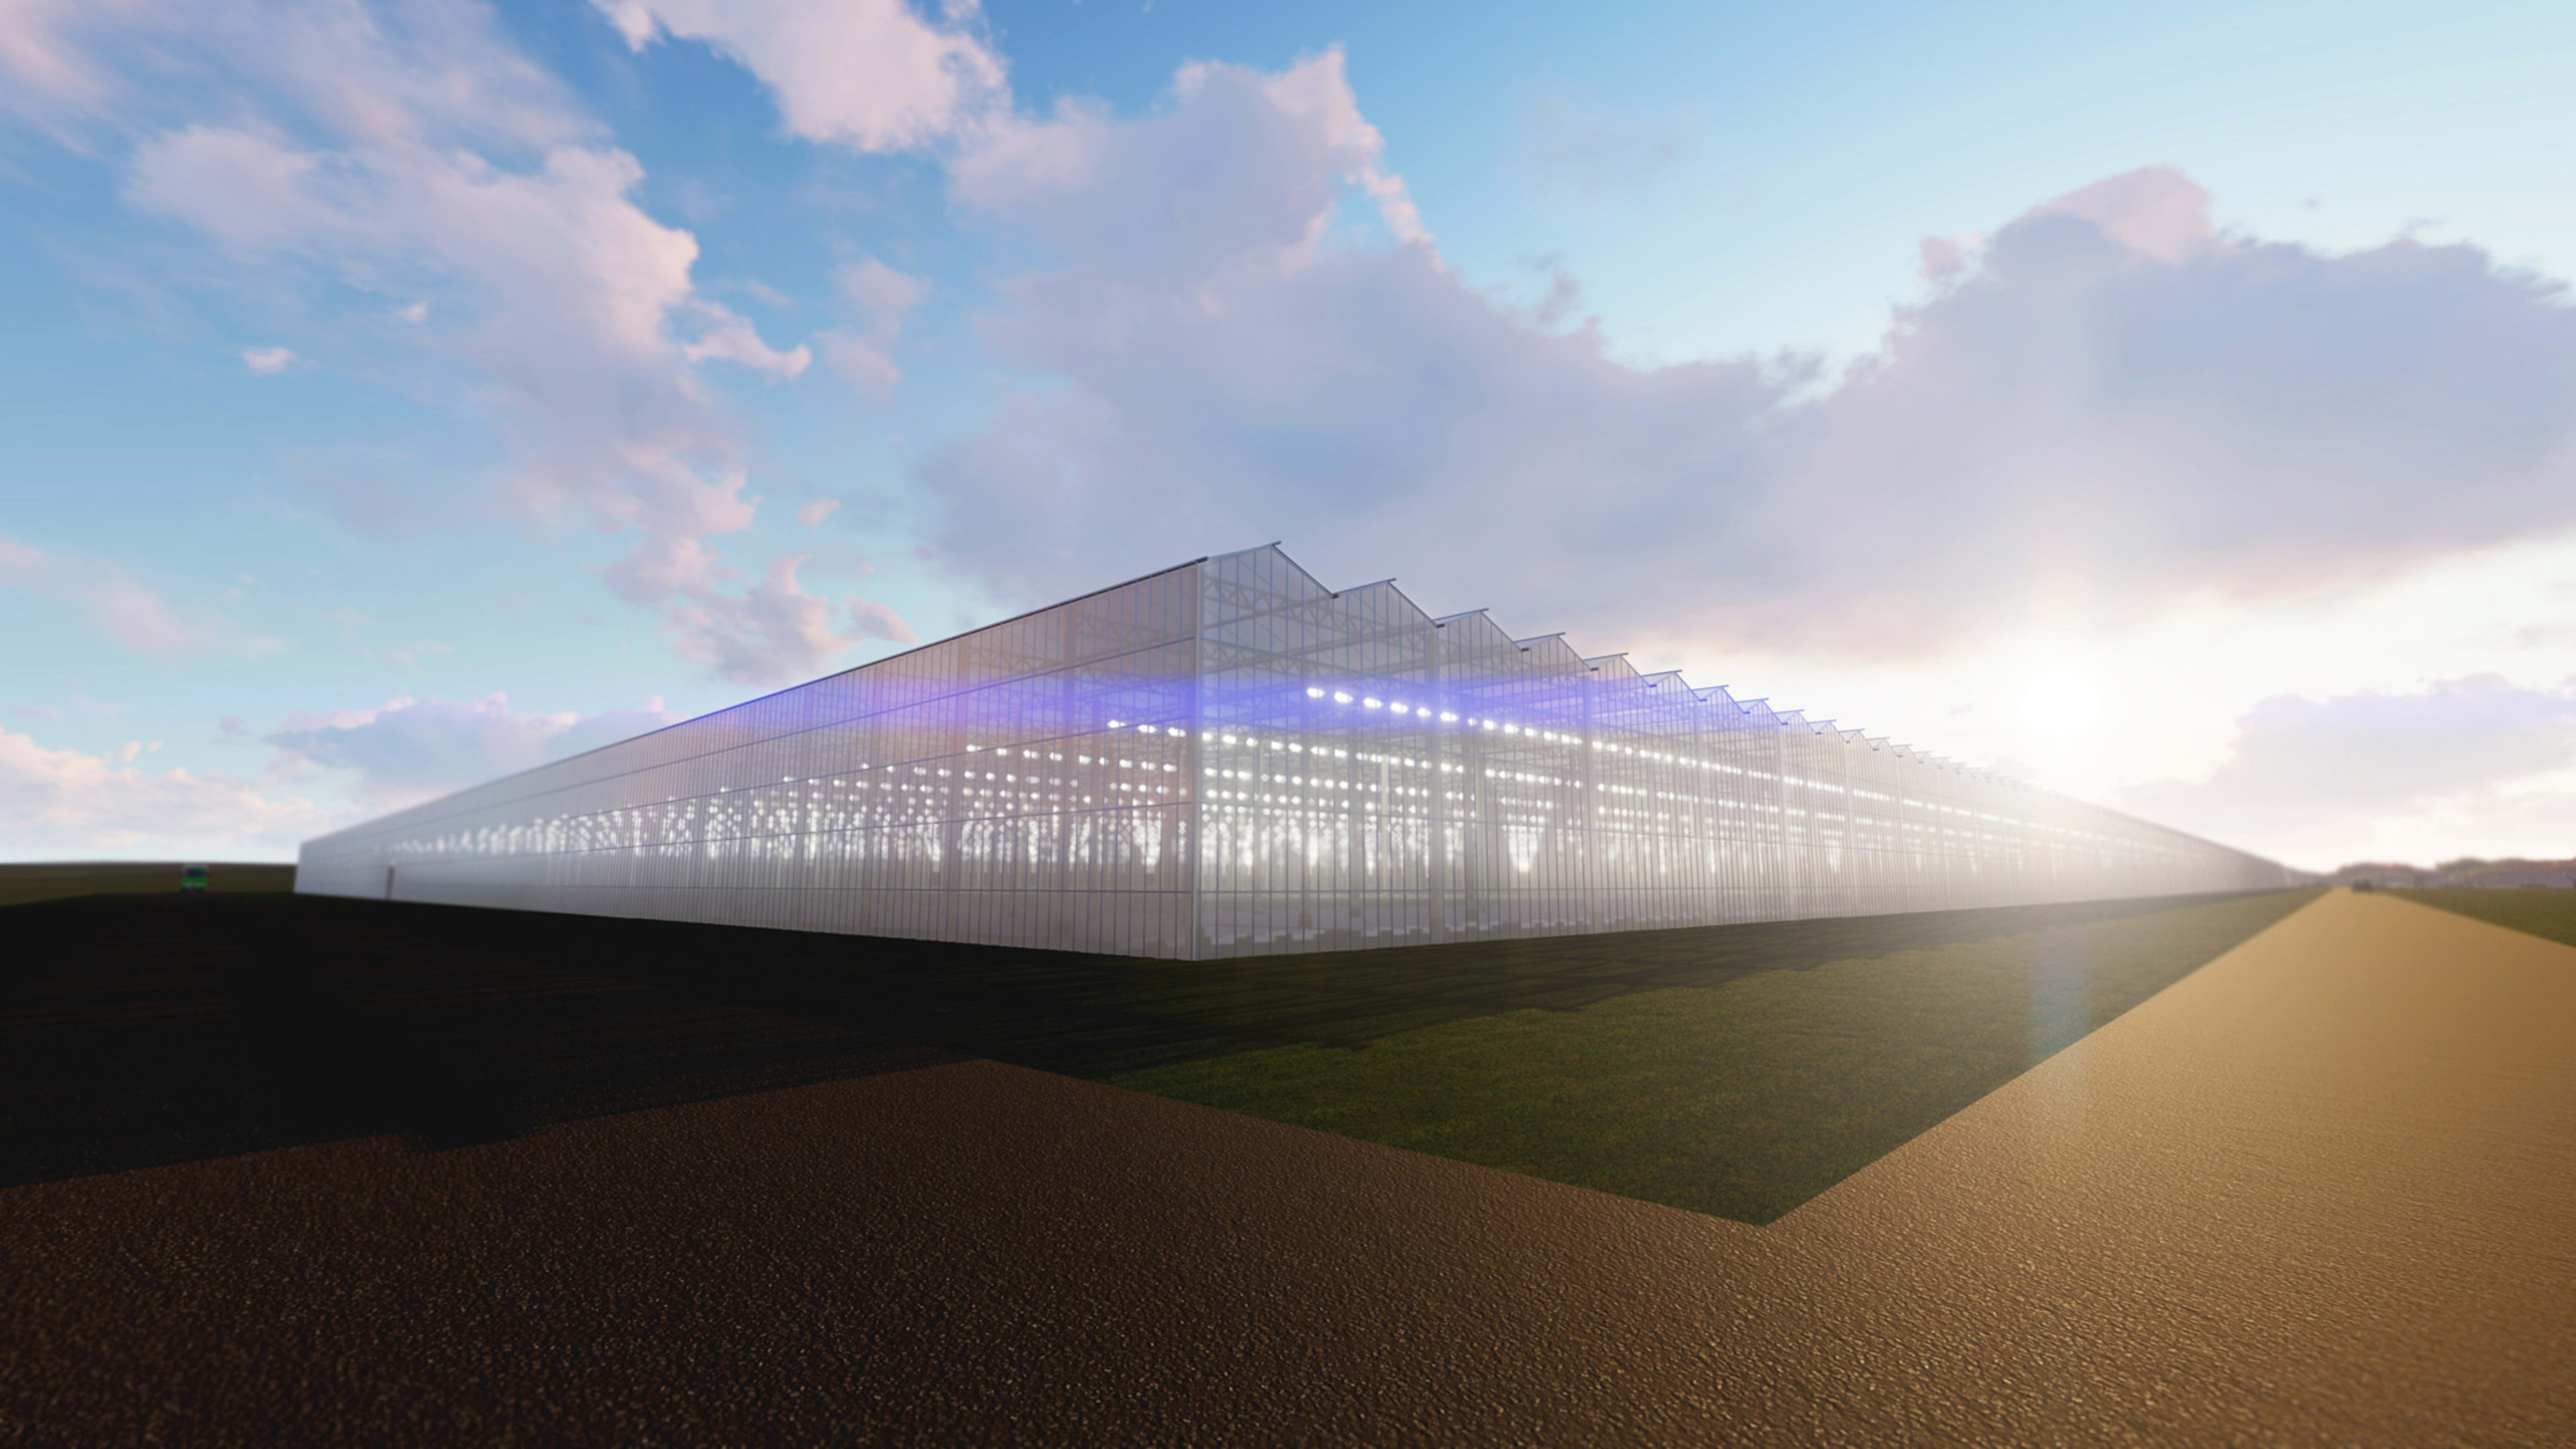 This startup is going to put one of the world’s largest sustainable greenhouses in coal country